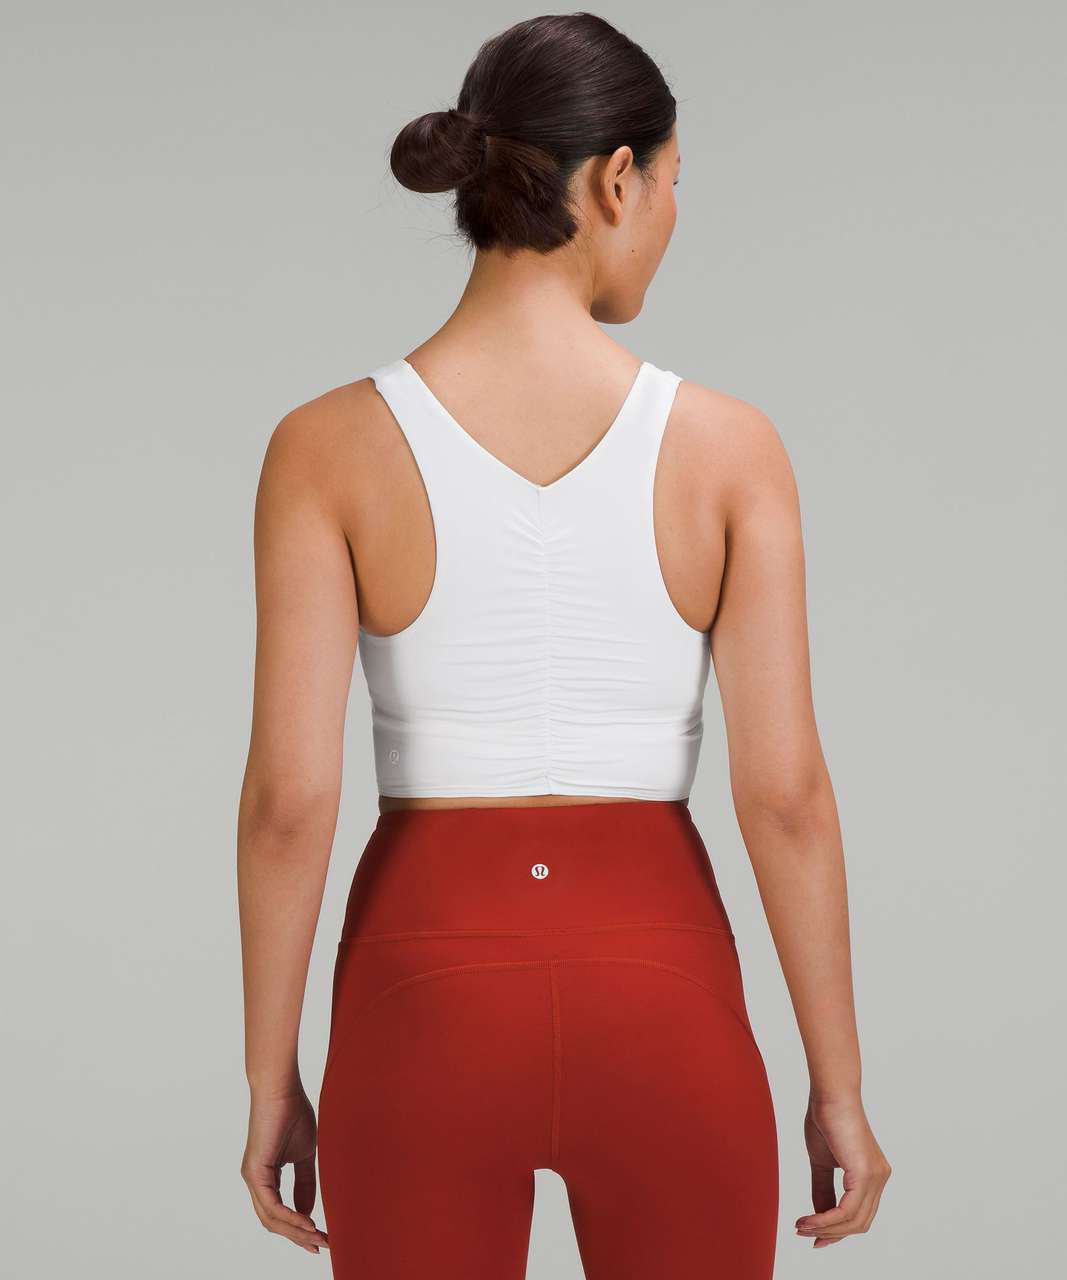 Nulu and Mesh Yoga Bra - Spiced Chai Fit Pic + Rave : r/lululemon